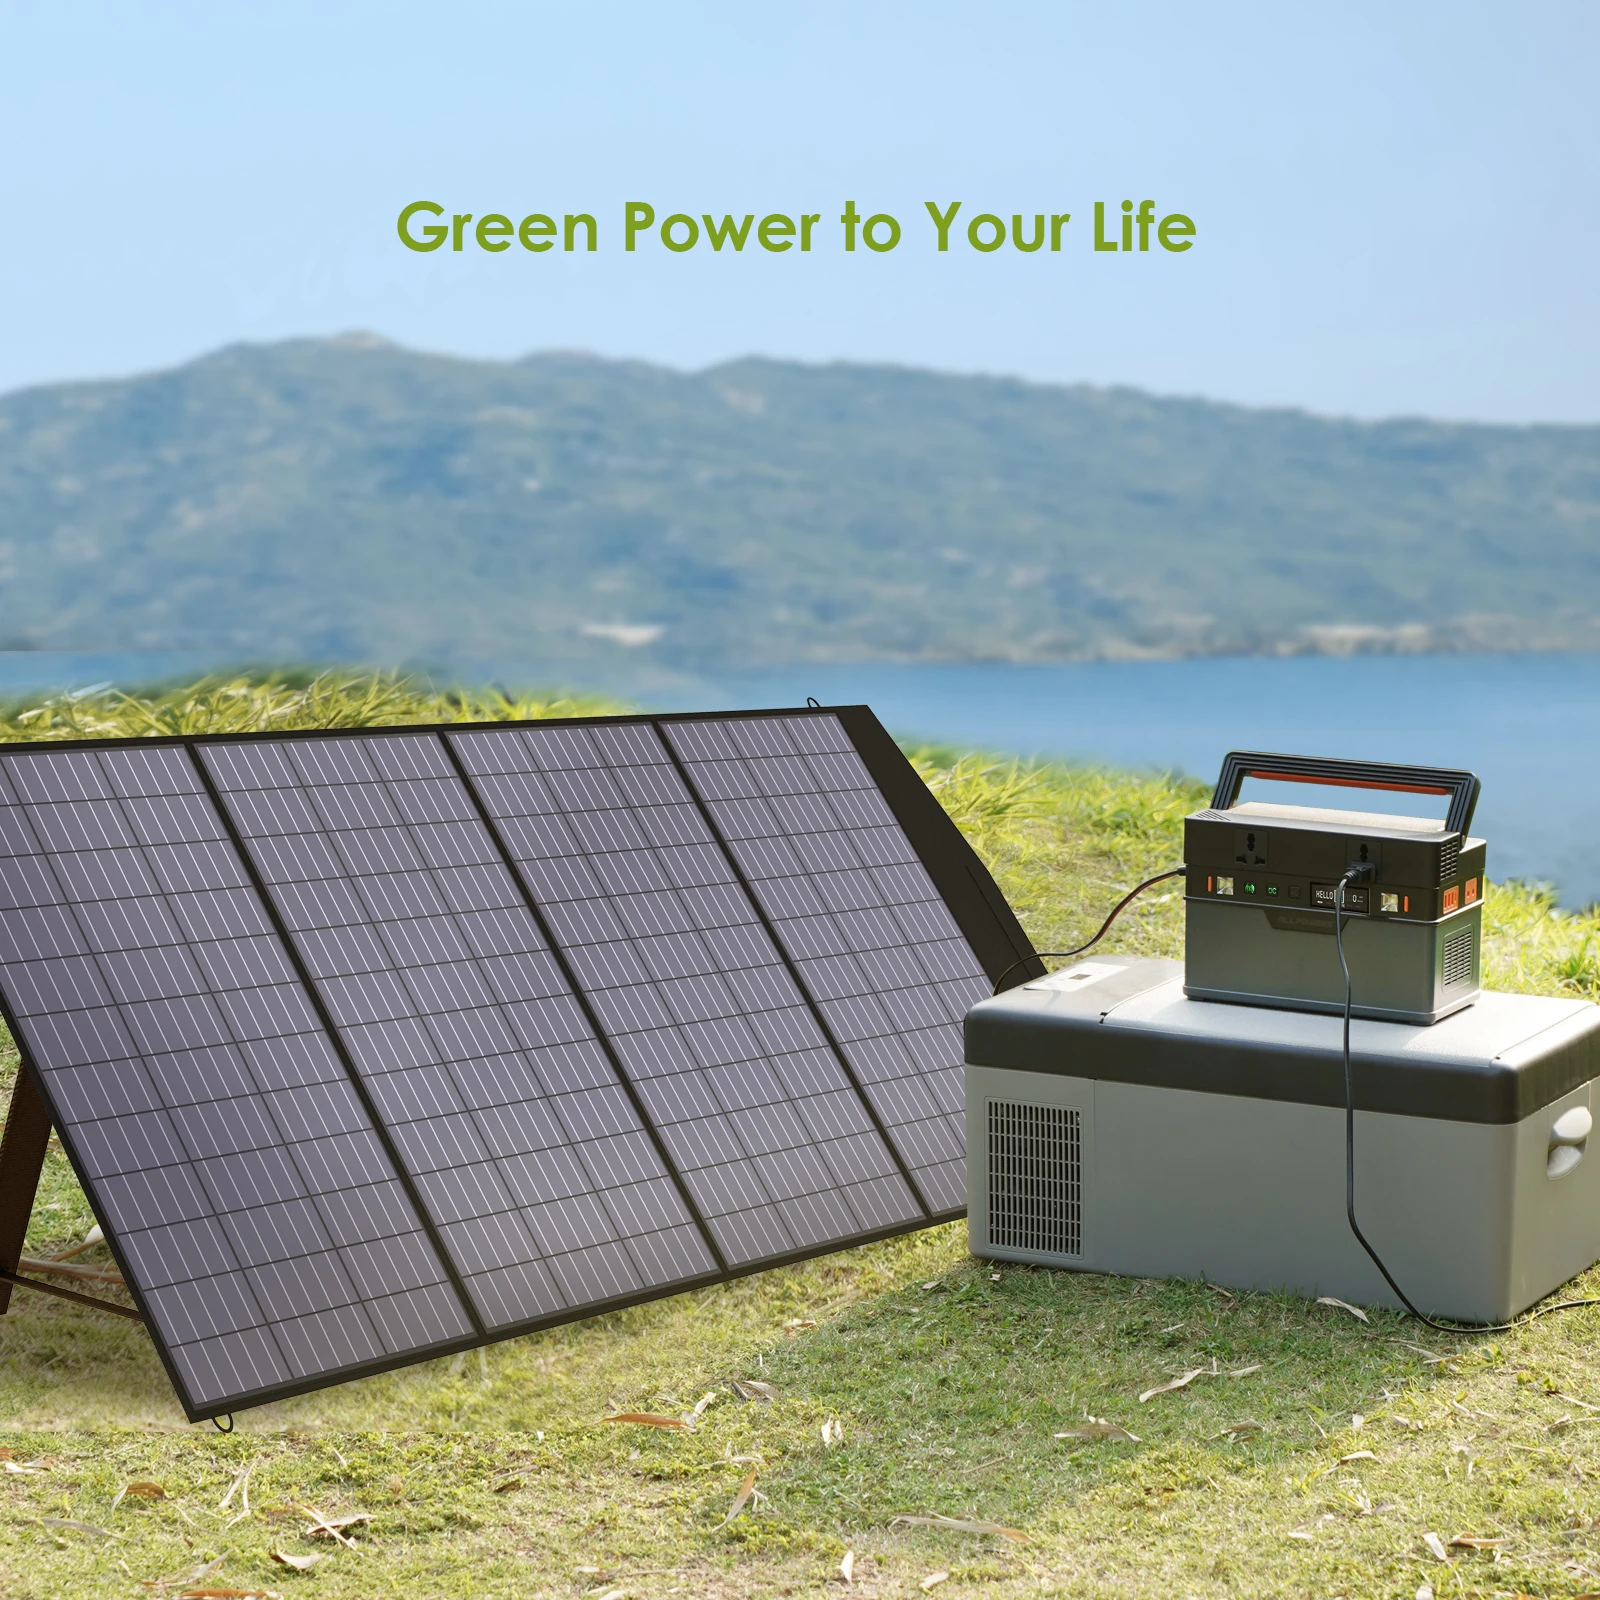 ALLPOWERS Portable solar Power Station 700W / 1500W Outdoor Generators, 110 / 230V Battery Backup With Mobile 200W Solarpanel